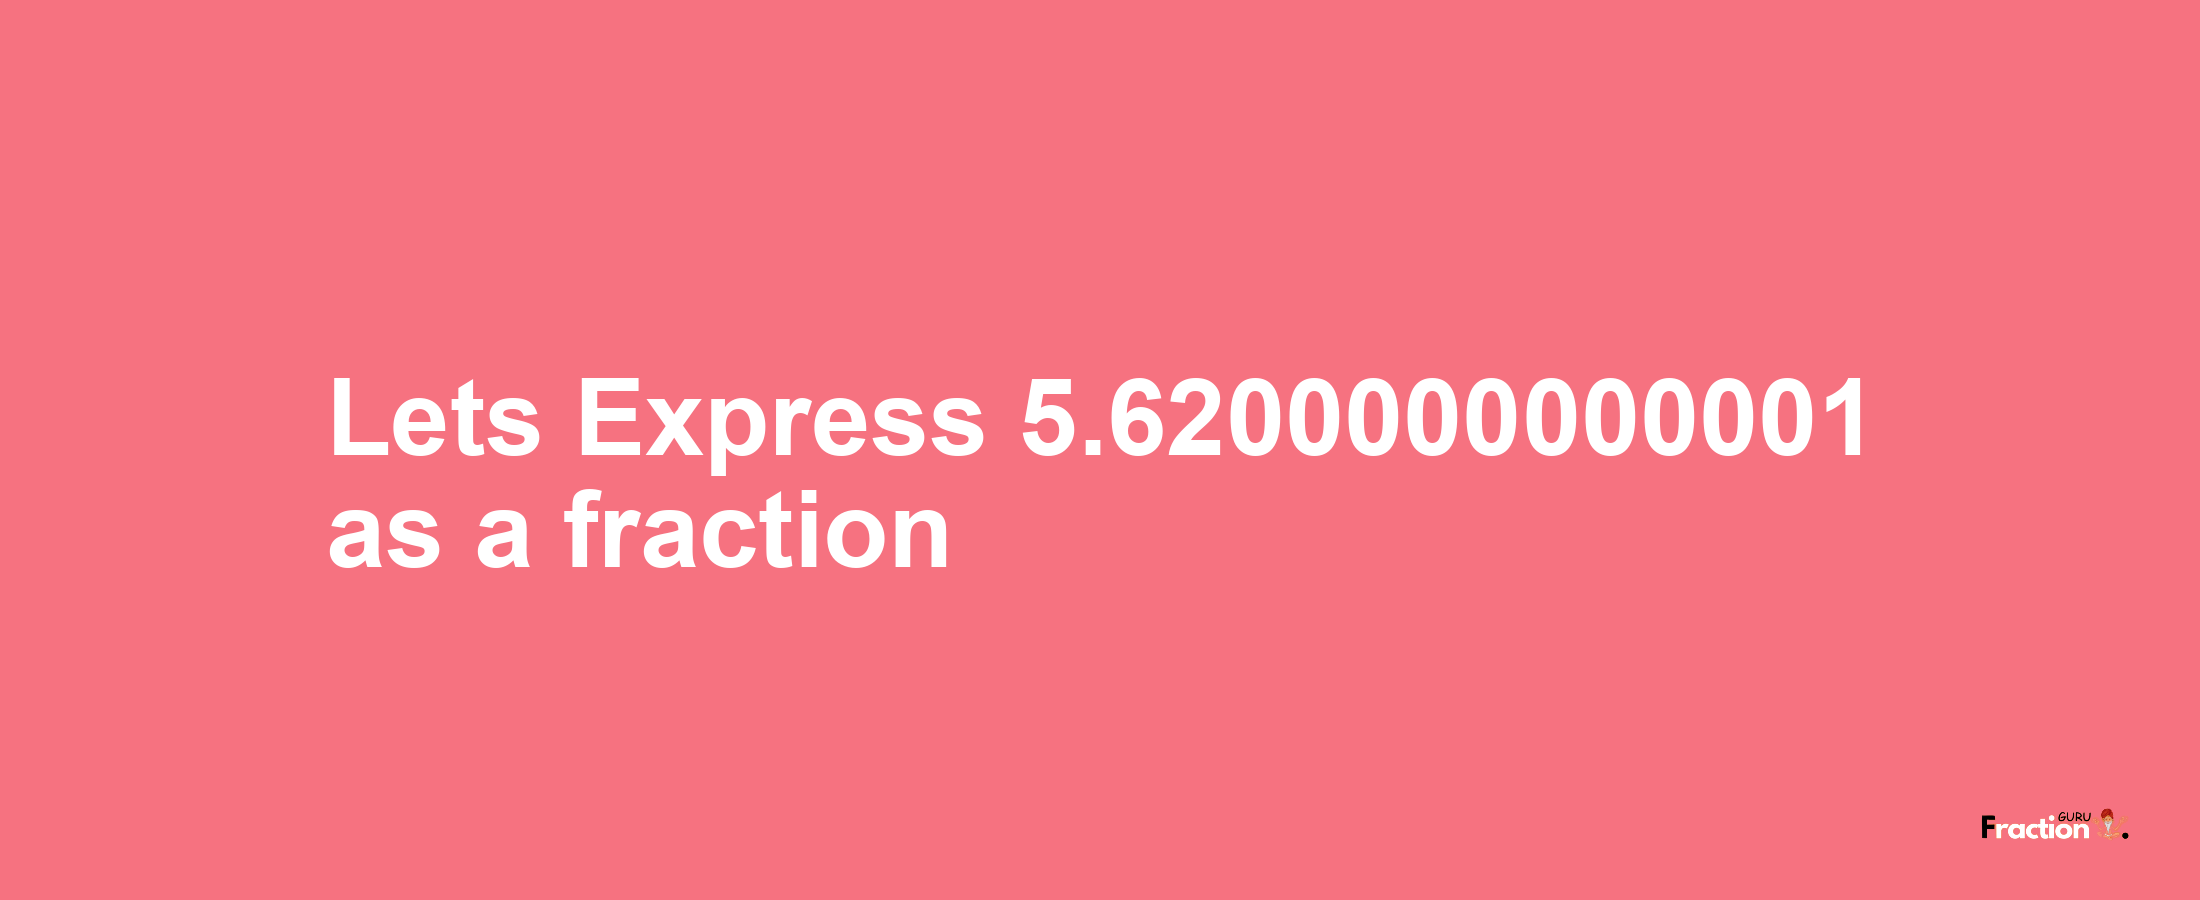 Lets Express 5.6200000000001 as afraction